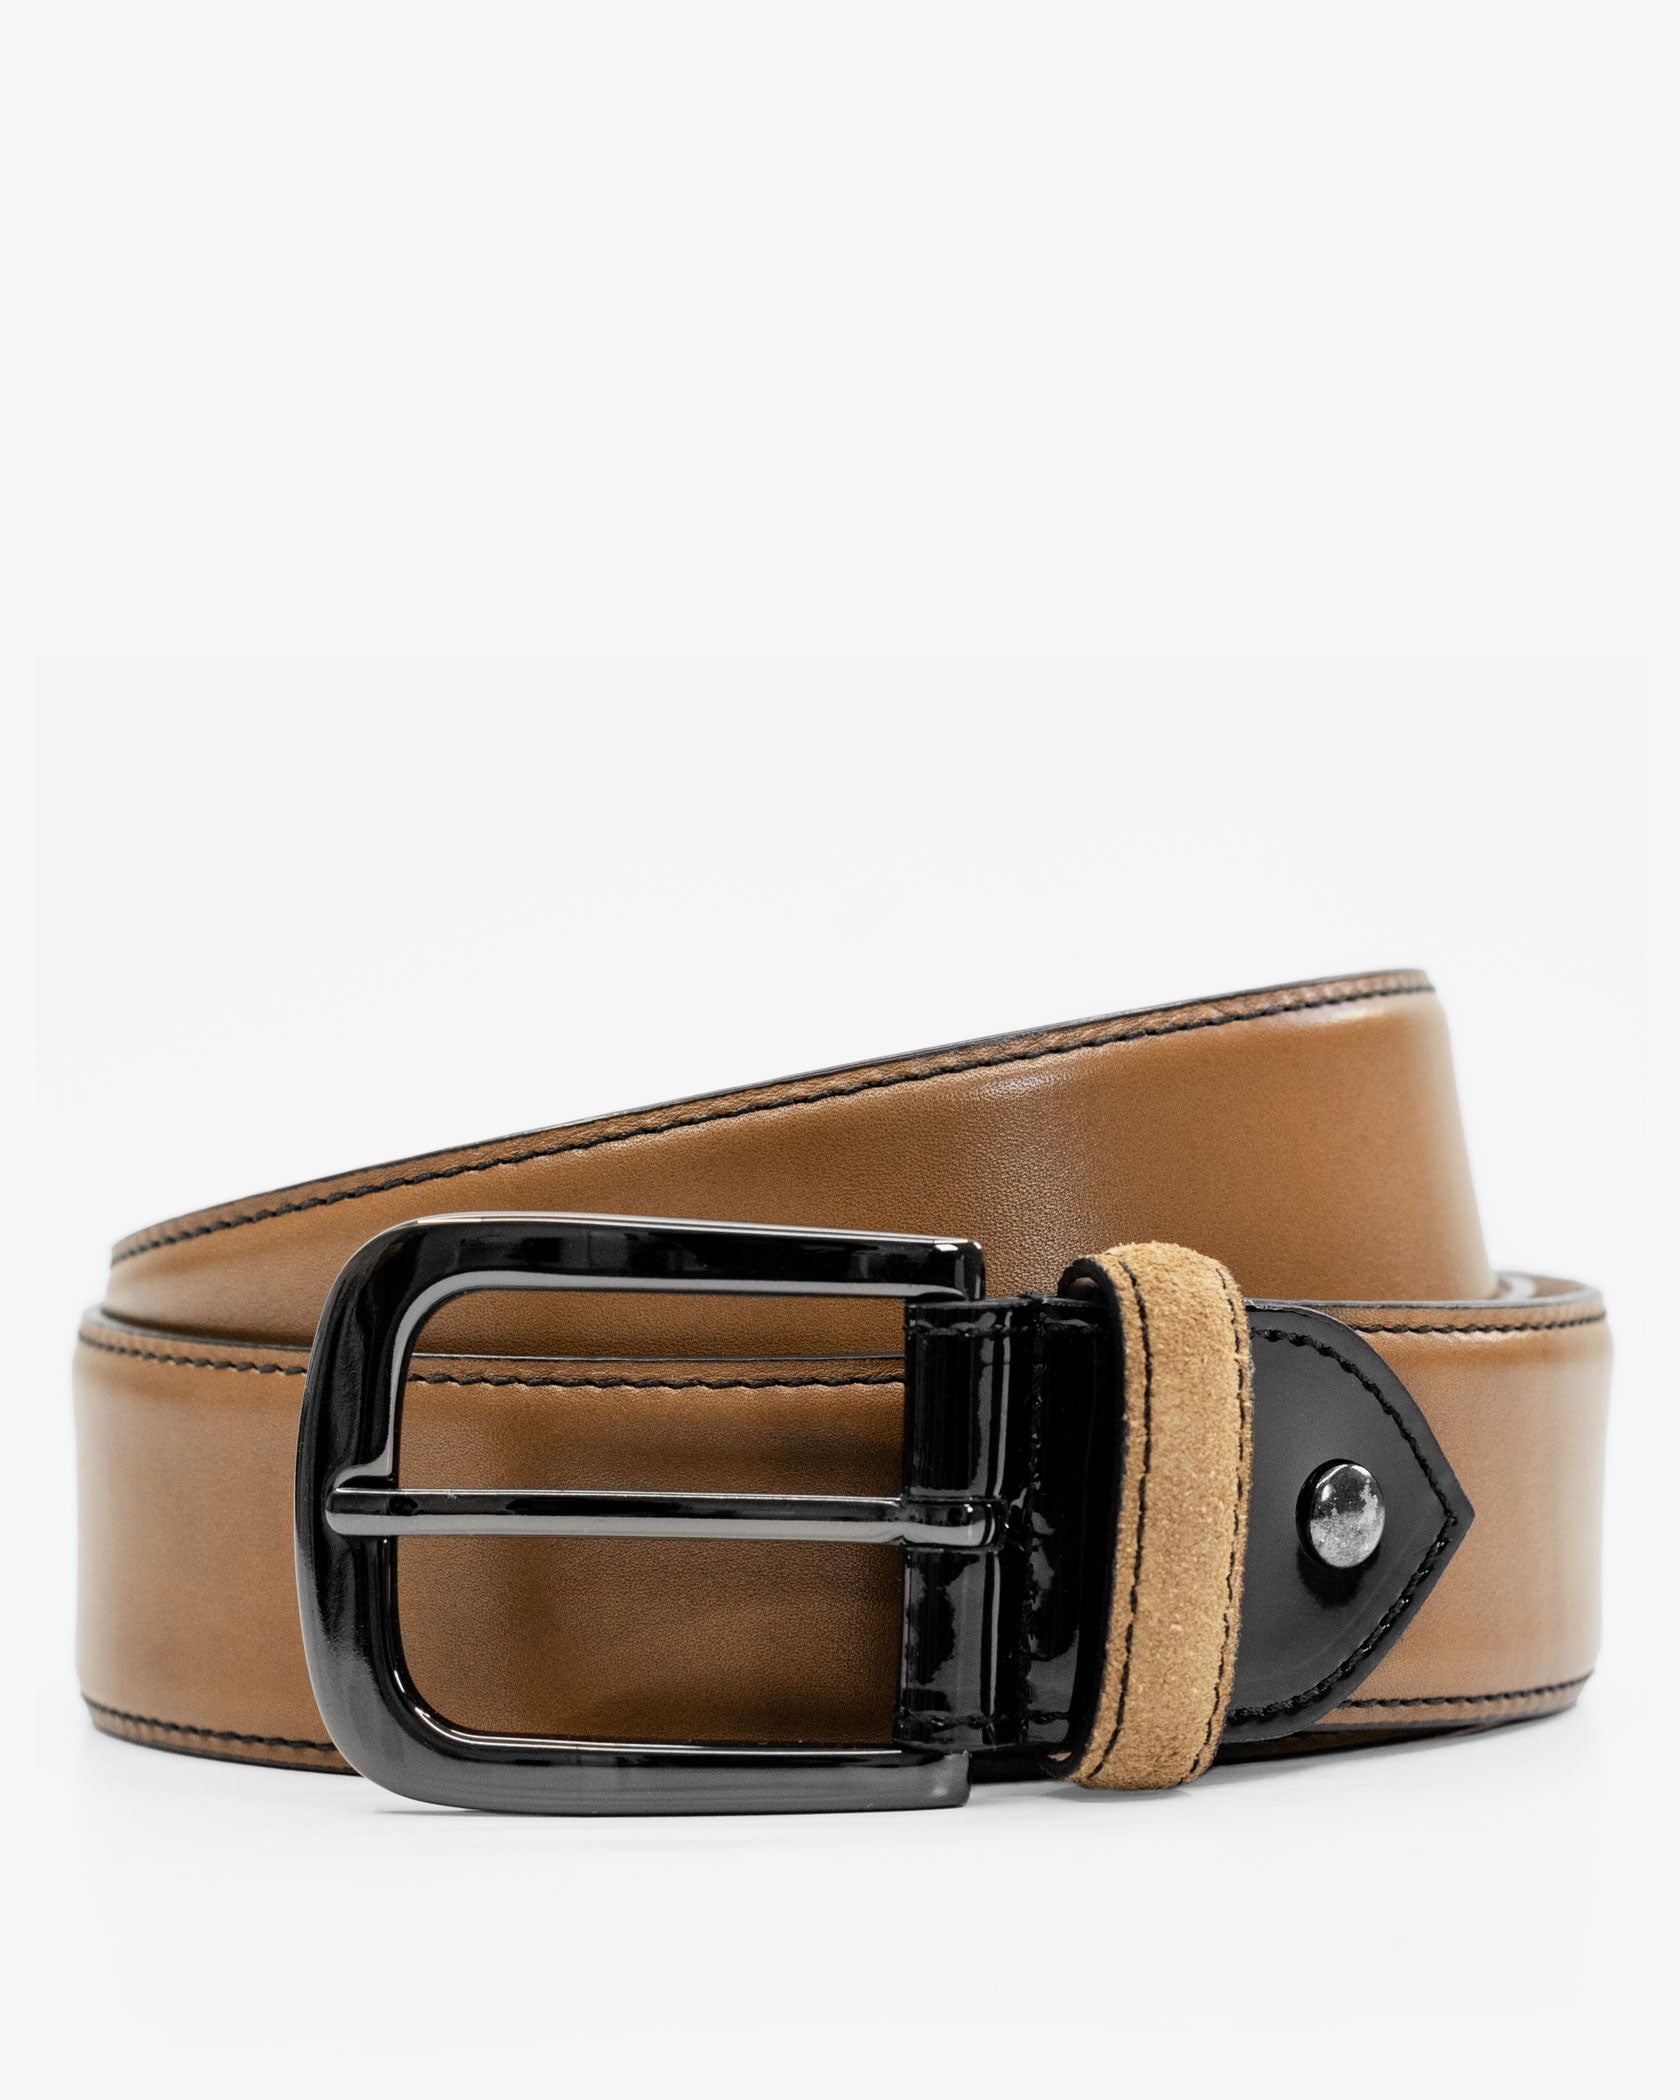 Bryant/Draper - The Poitier Brown Leather Belt